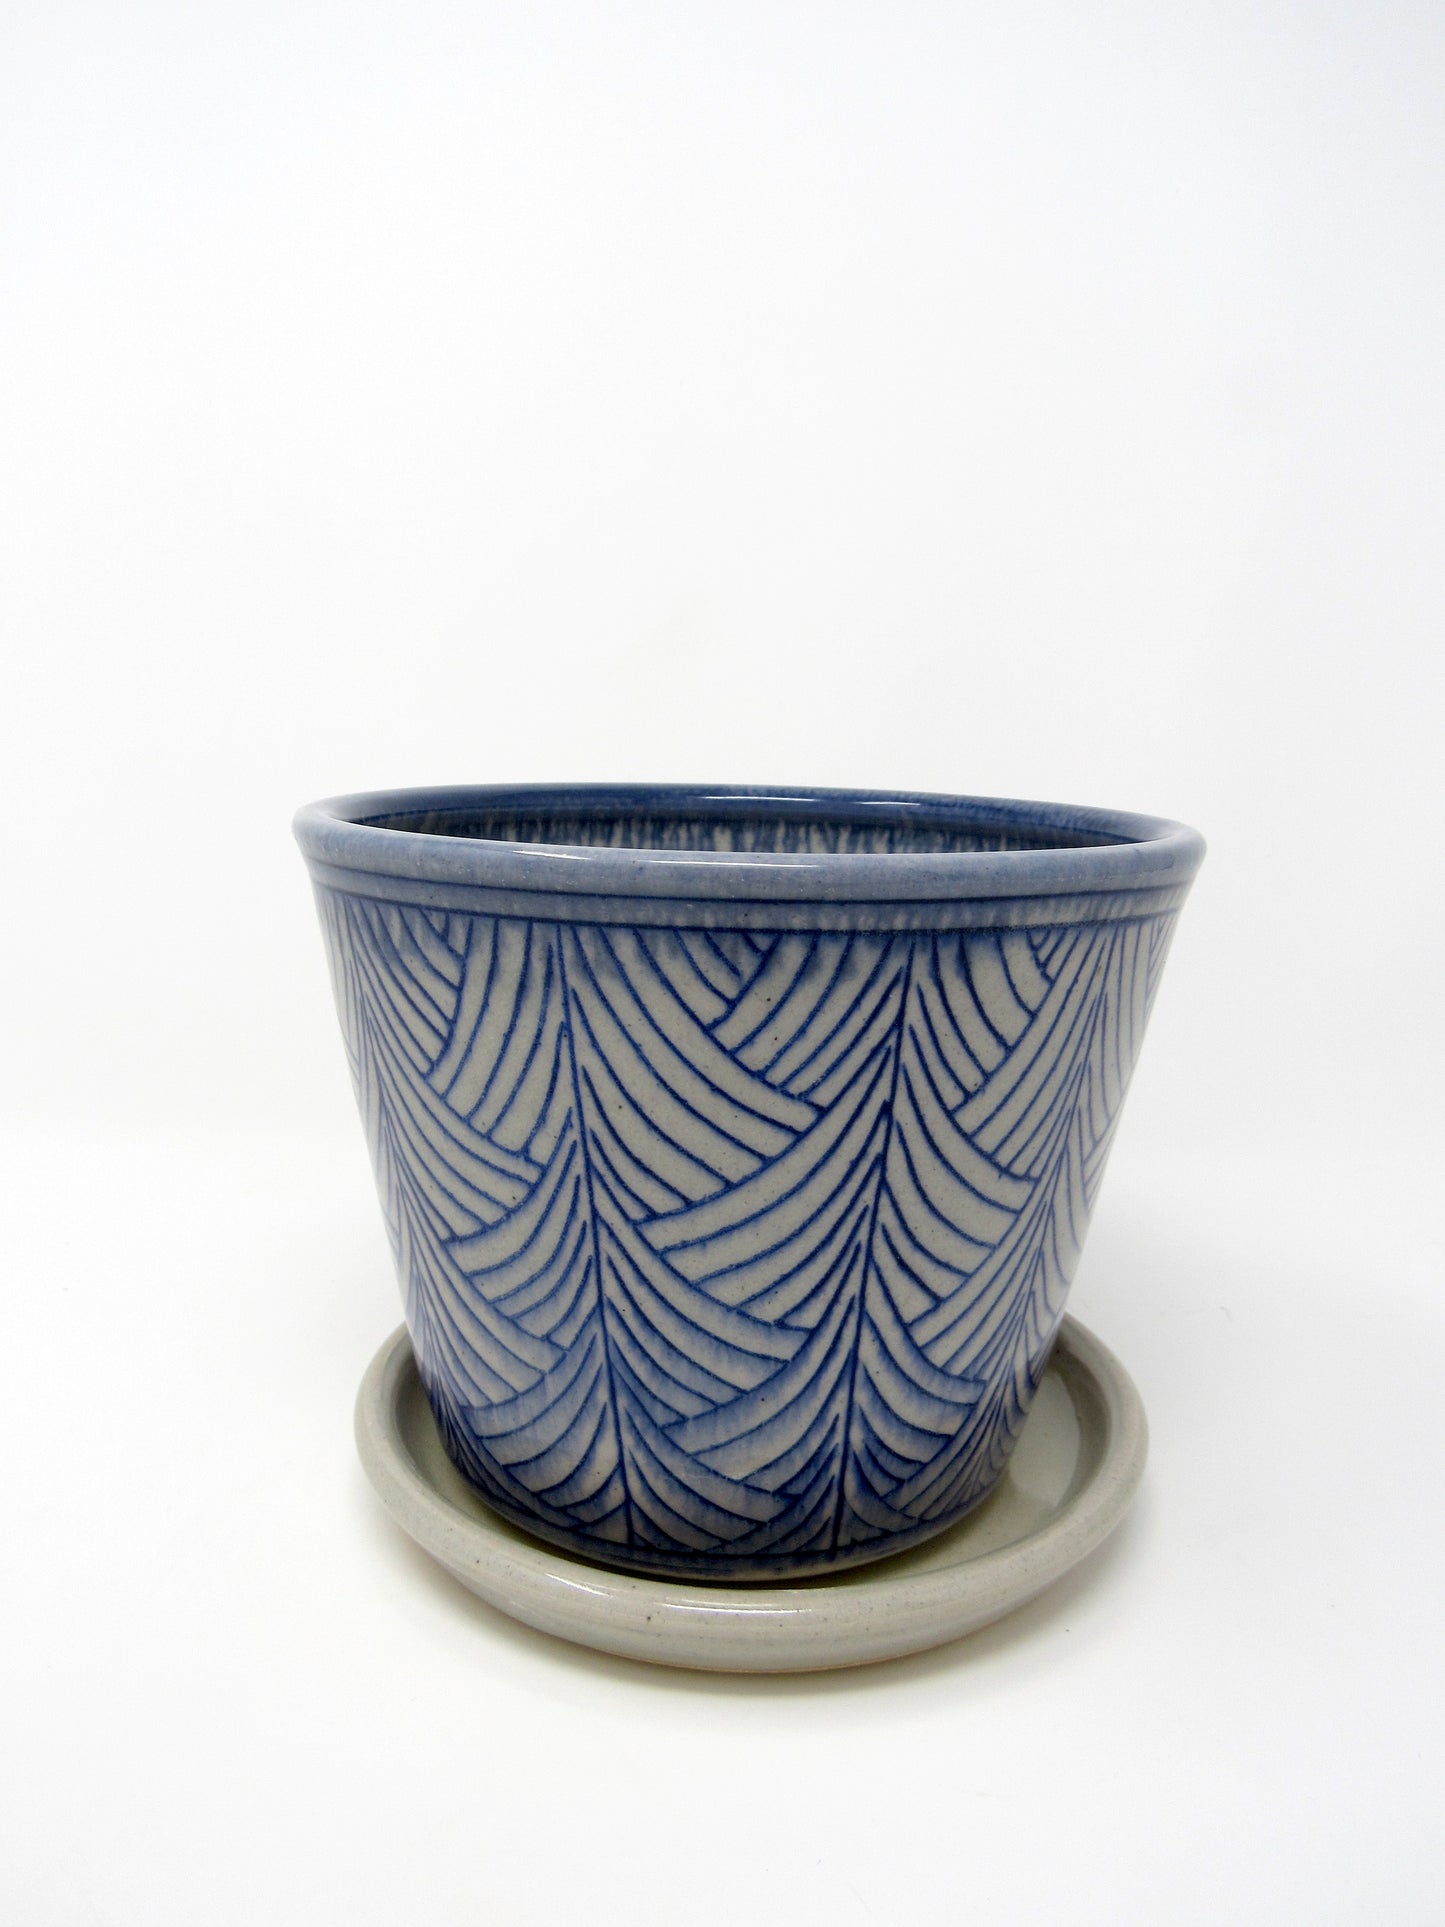 Art Deco Planter with Base, Inlaid in Blue and Gray